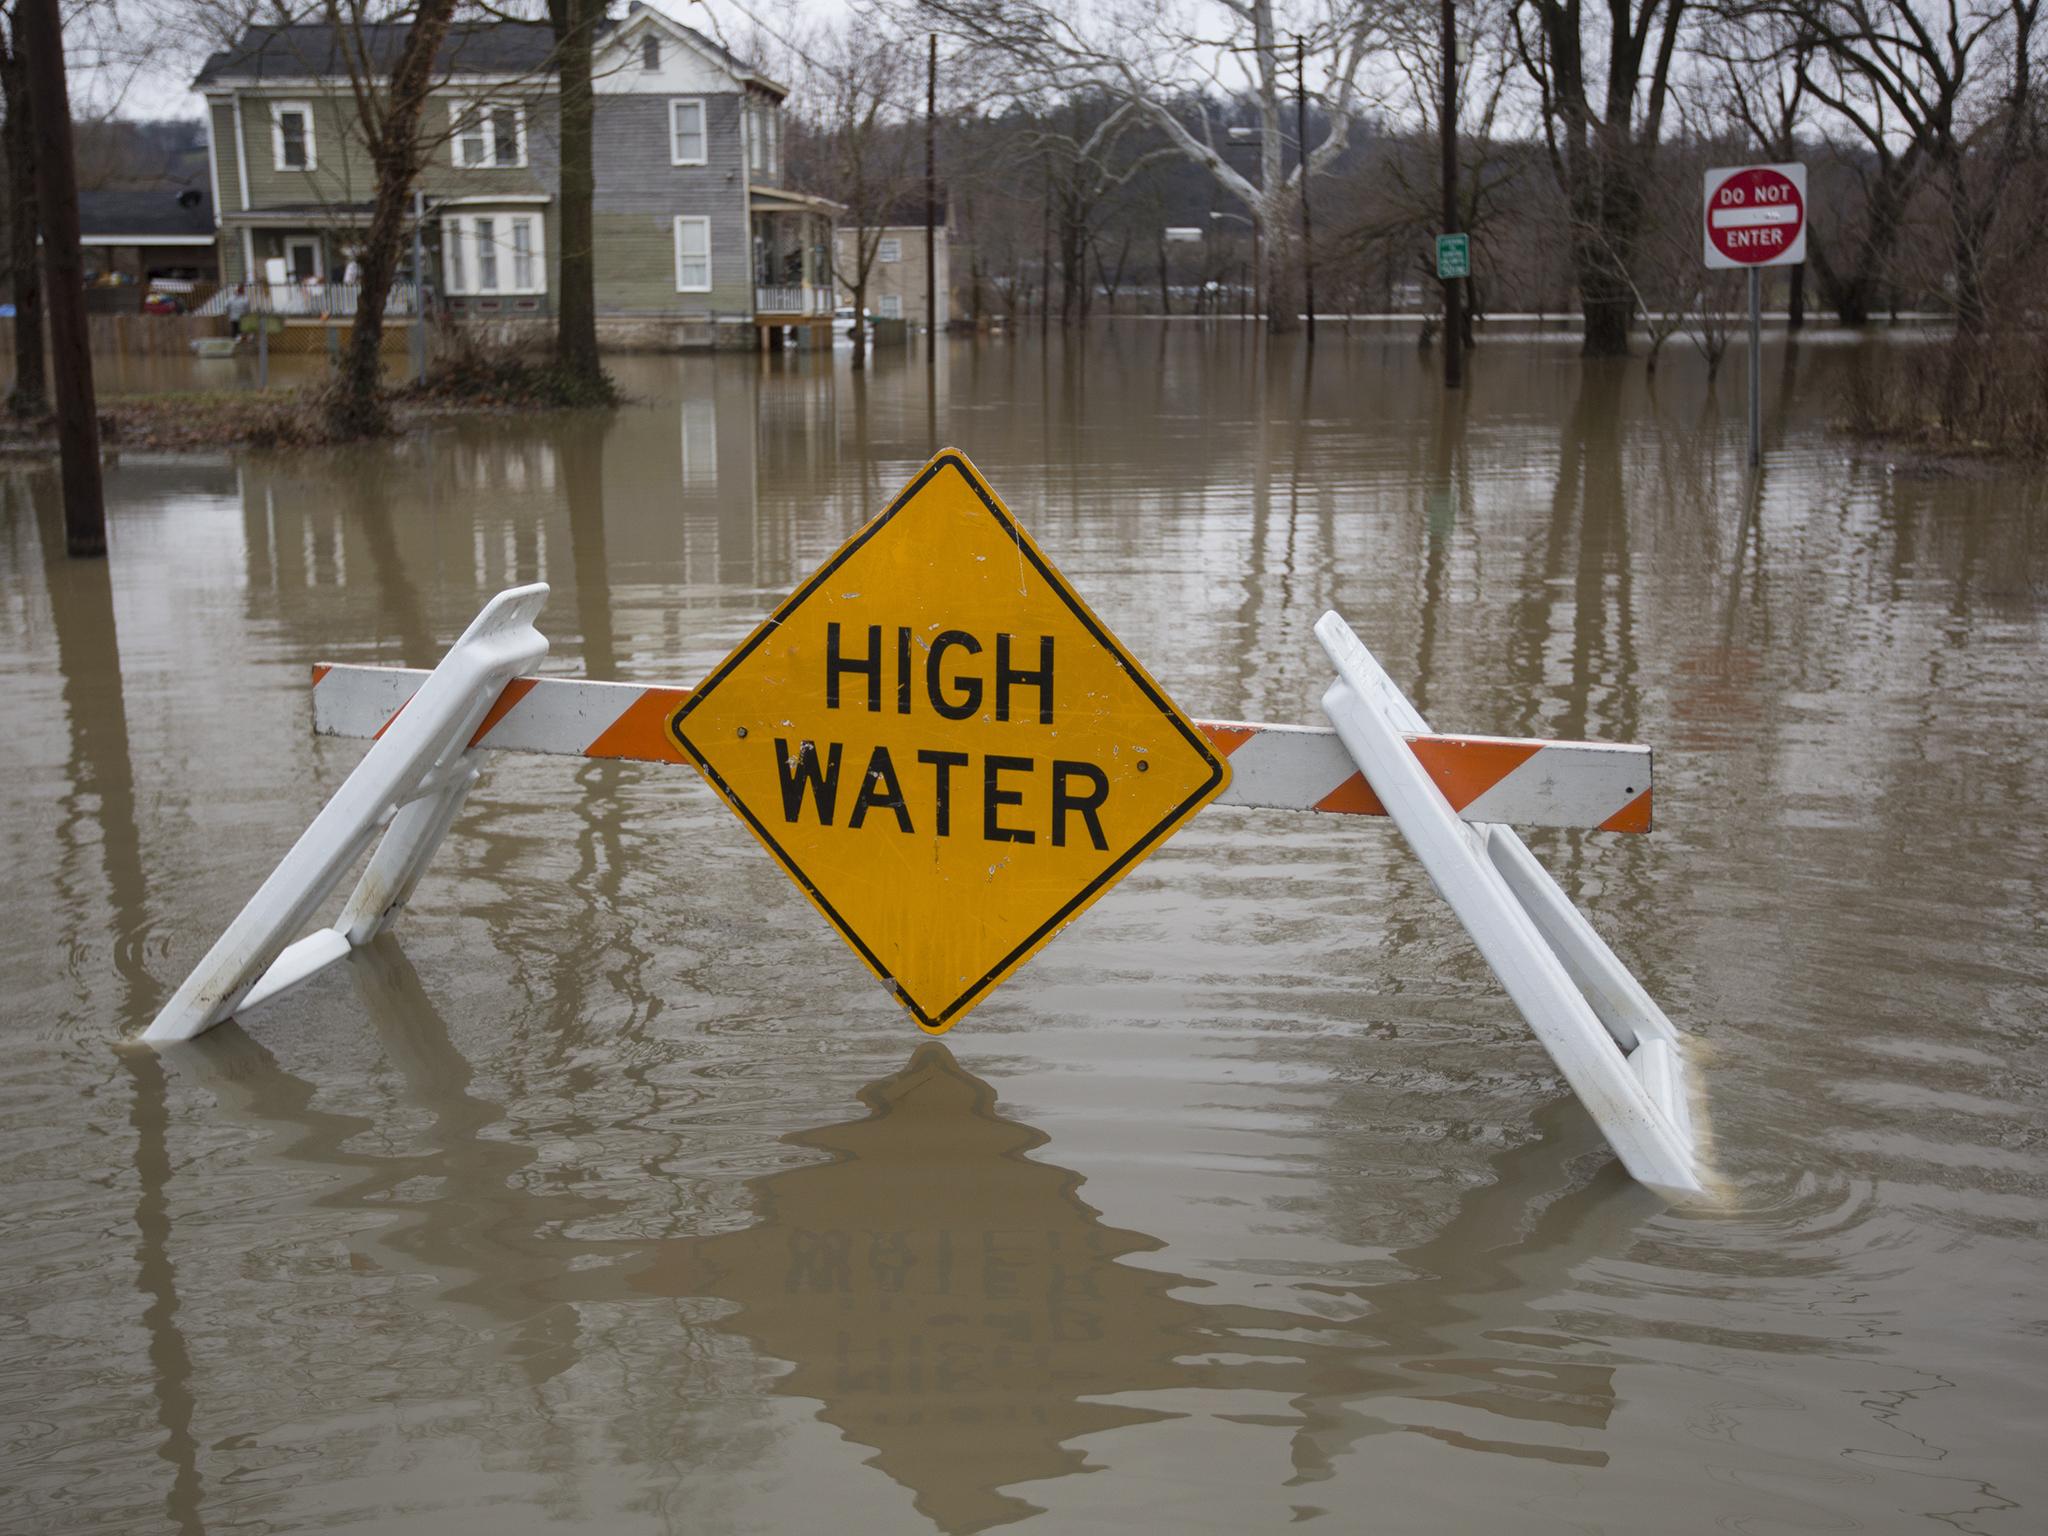 Forecasters believe the extreme weather conditions could lead to the Ohio River reaching water levels not seen since 1997's deadly floods